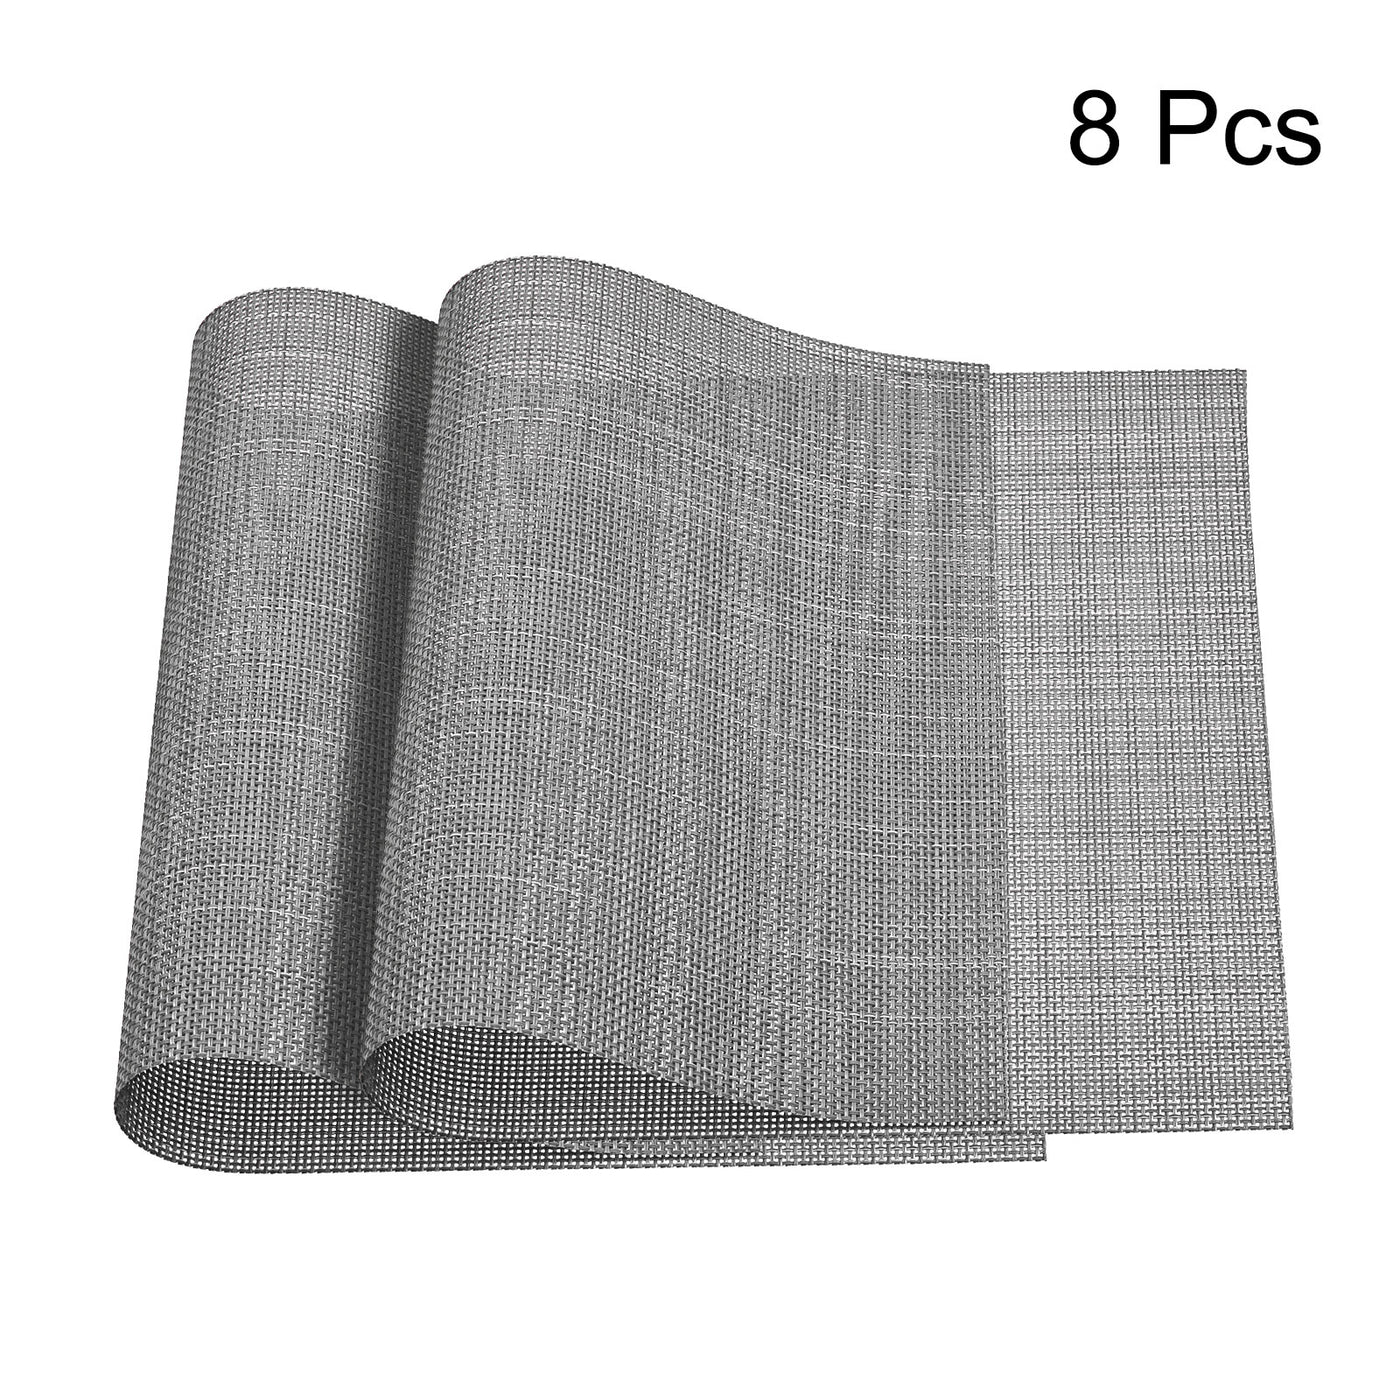 uxcell Uxcell Place Mats, 450x300mm Table Mats Set of 8 PVC Washable Woven Placemat Gray